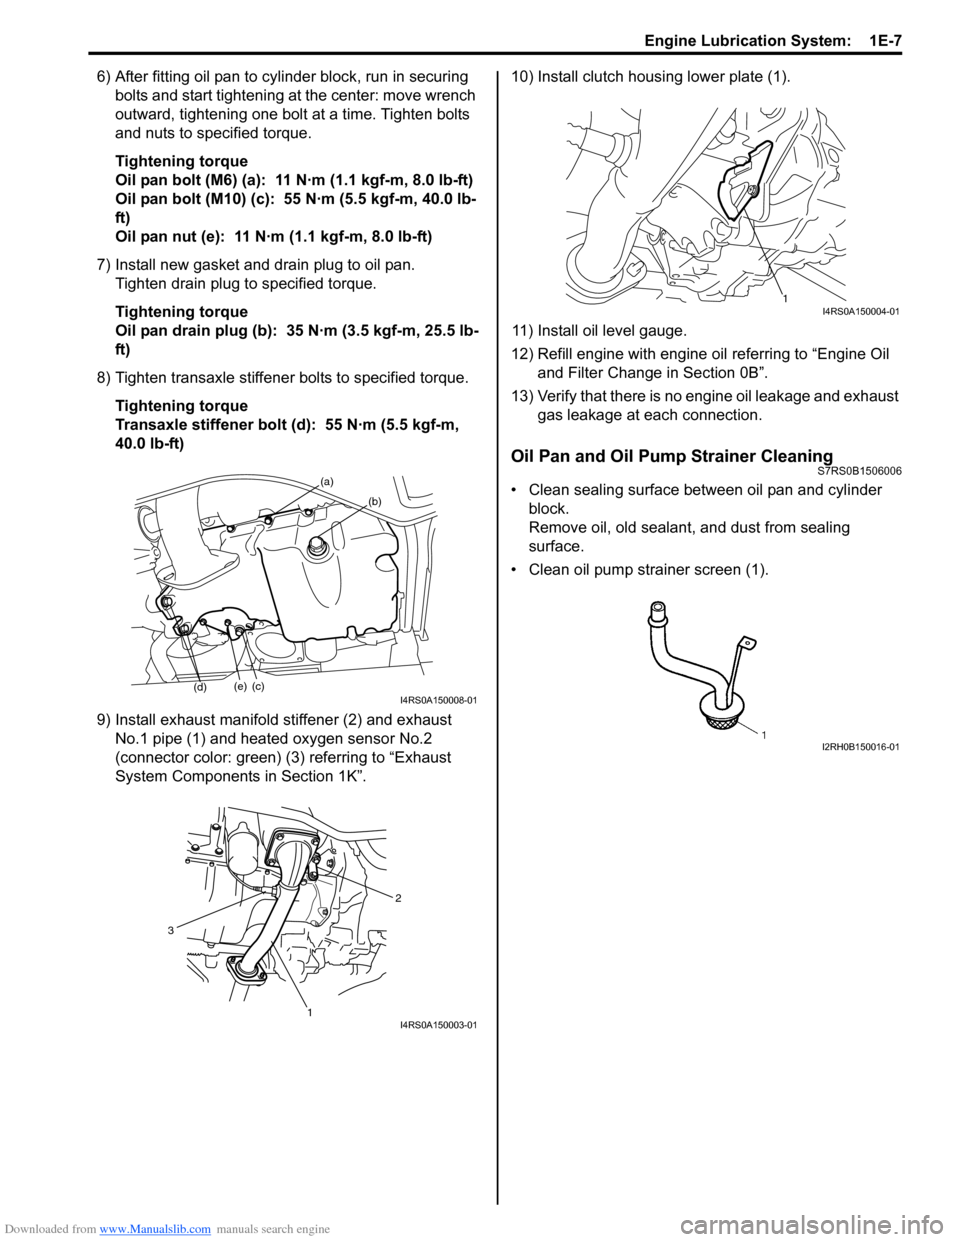 SUZUKI SWIFT 2007 2.G Service Workshop Manual Downloaded from www.Manualslib.com manuals search engine Engine Lubrication System:  1E-7
6) After fitting oil pan to cylinder block, run in securing bolts and start tightening at the center: move wre